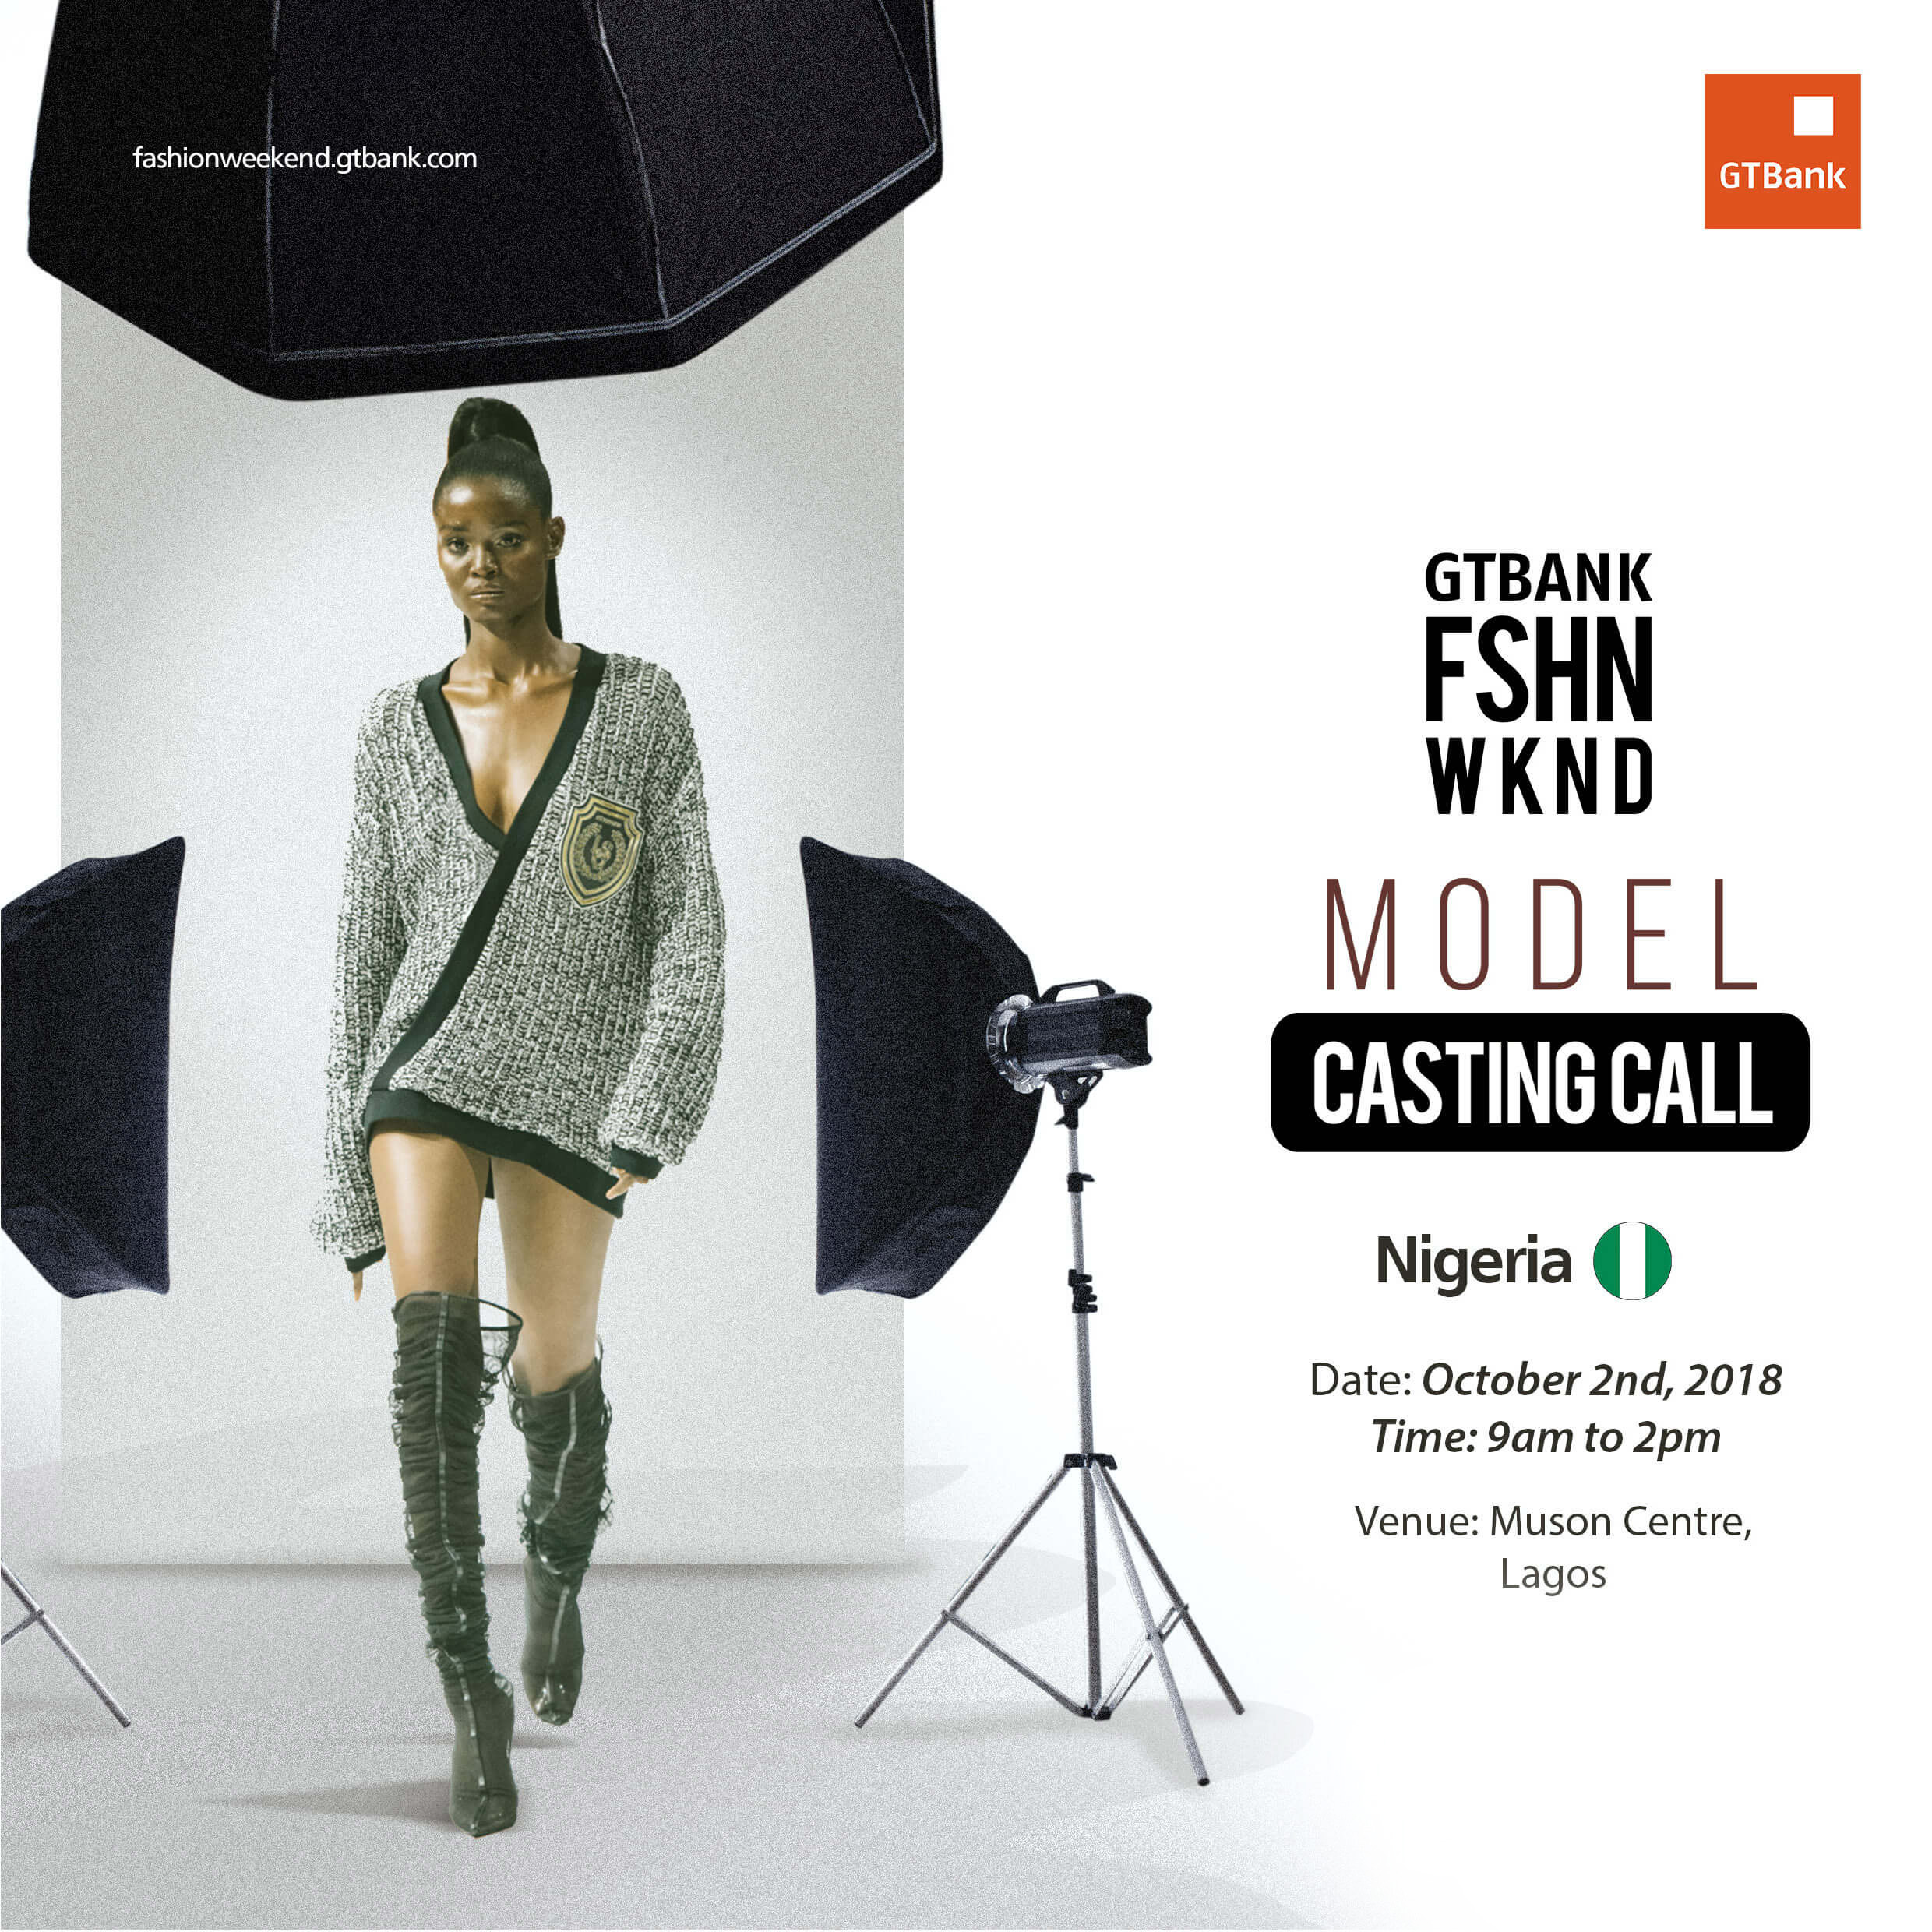 The 2018 GTBank Fashion Weekend model casting call holds October 2nd